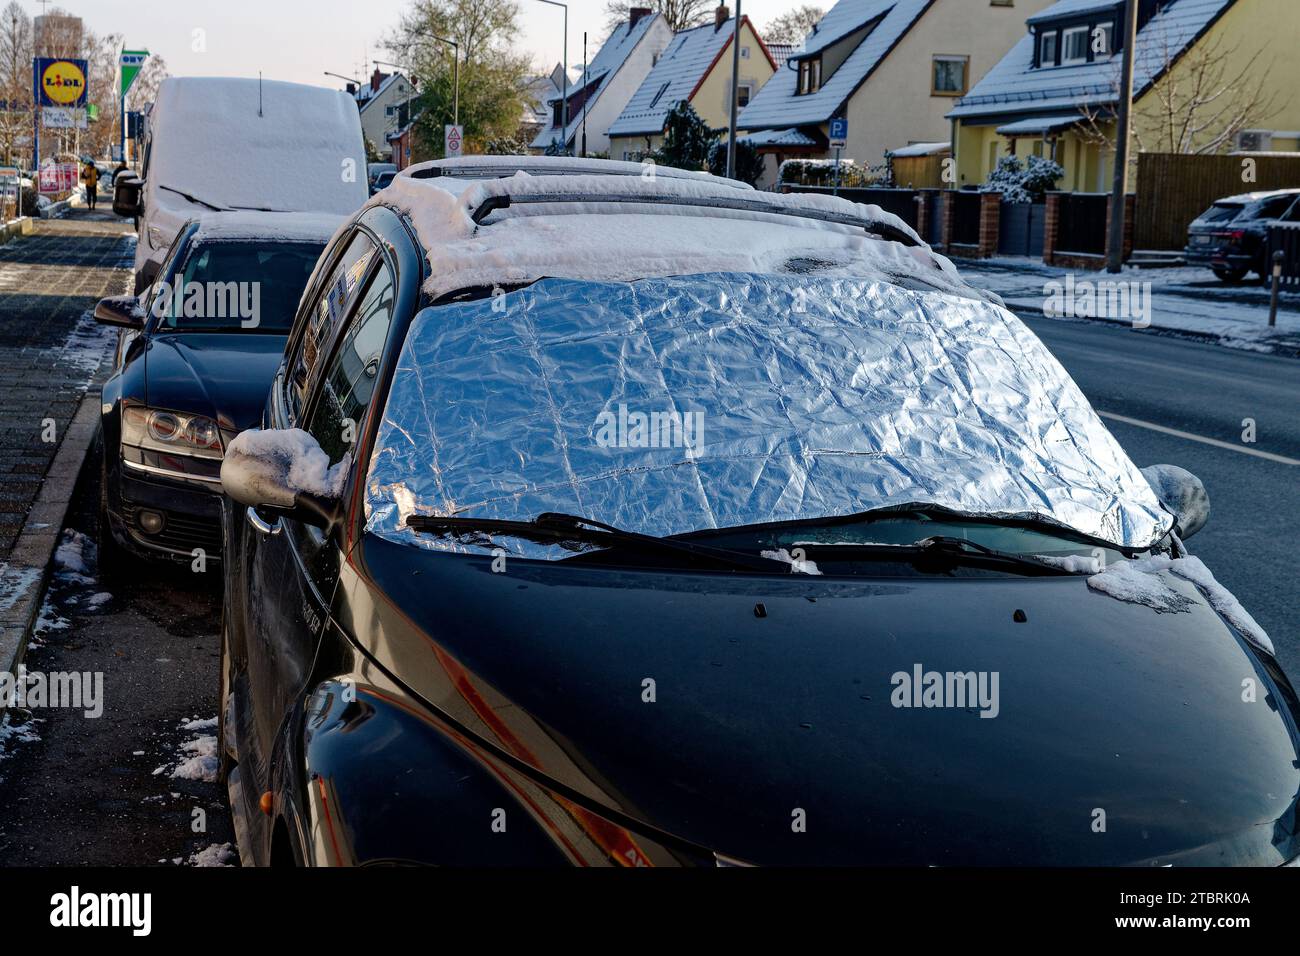 https://c8.alamy.com/comp/2TBRK0A/windshield-of-a-parked-car-covered-with-protective-film-in-winter-2TBRK0A.jpg